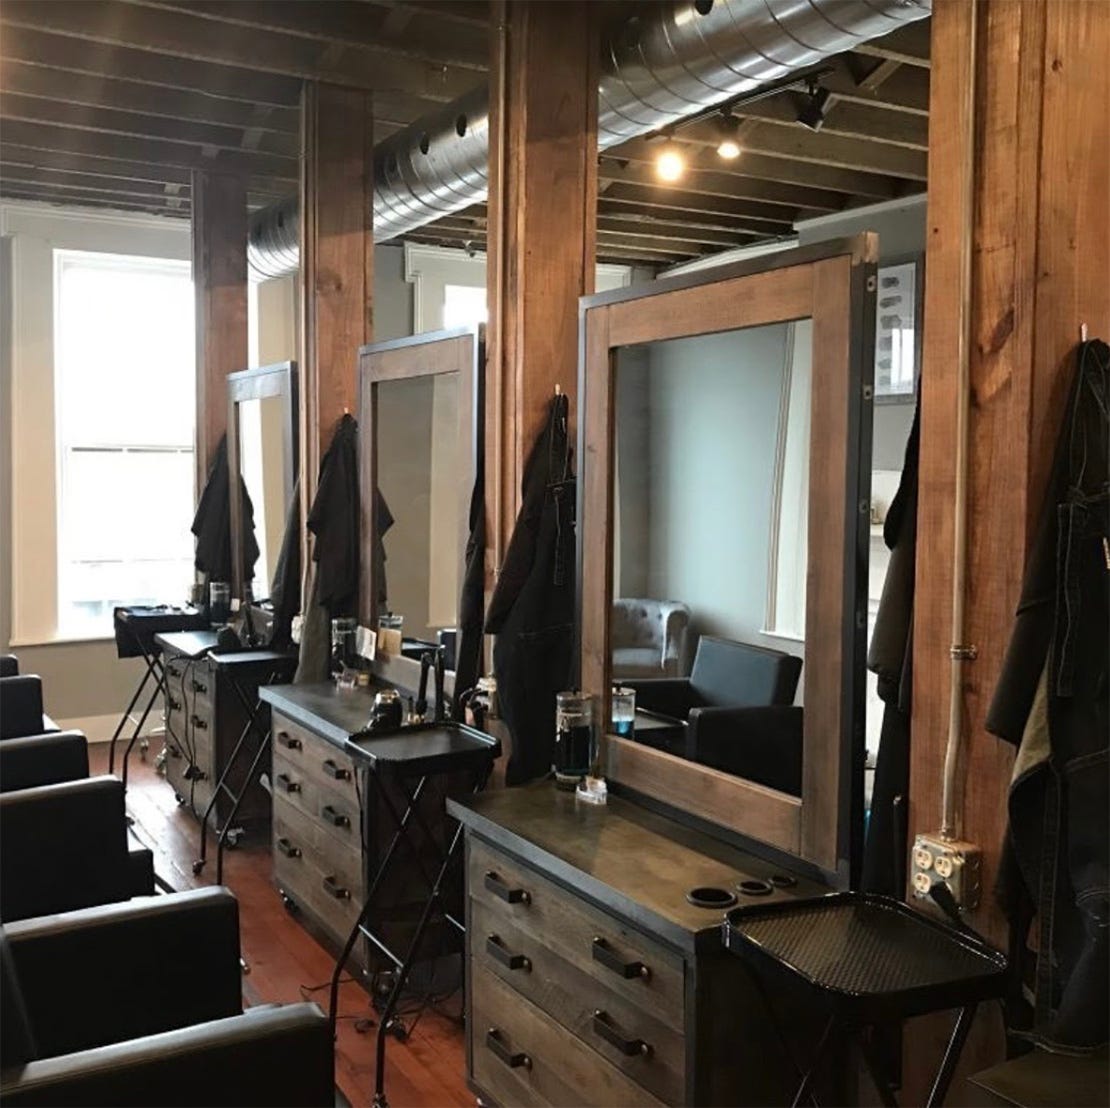 barber stations with essential tools and accessories including capes, styling tools and cutting tools